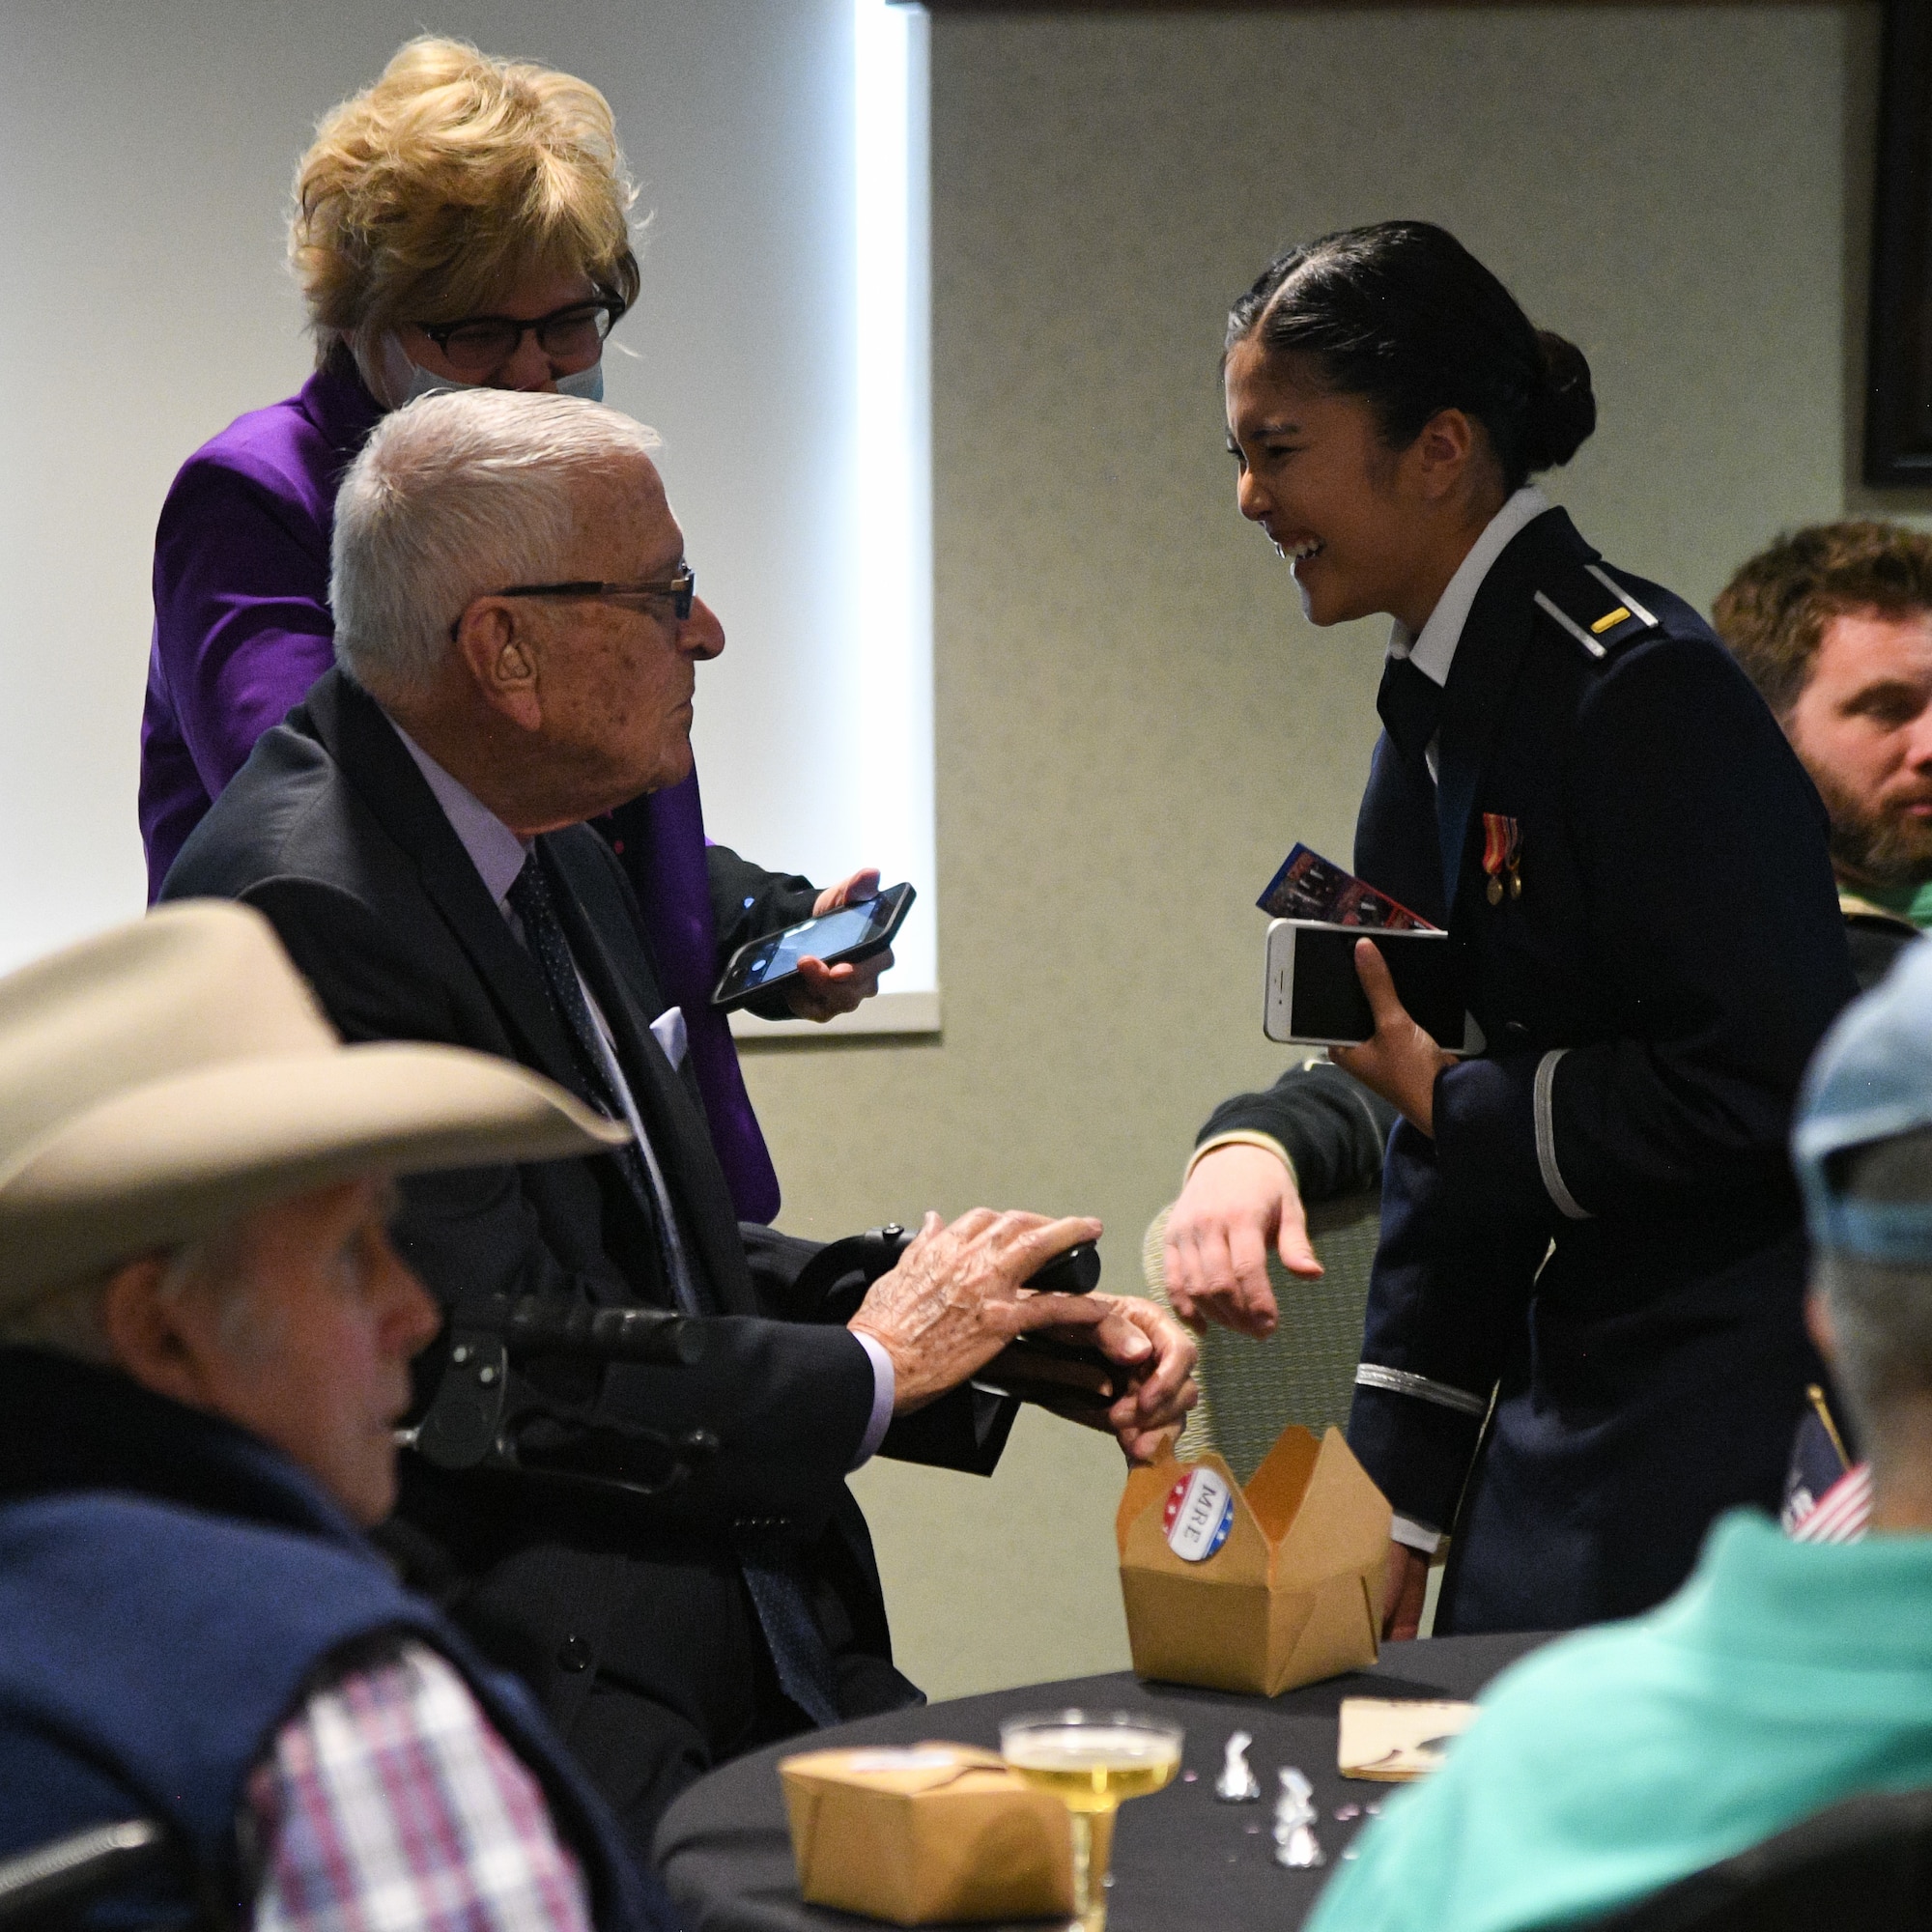 2nd Lt. Khaimook Grosshuesch speaks with three-war veteran Bob Ramos during a Valentine's Day dance held at the George E. Wahlen Veterans Home in Ogden, Utah, Feb. 14, 2018. (U.S. Air Force photo by R. Nial Bradshaw)